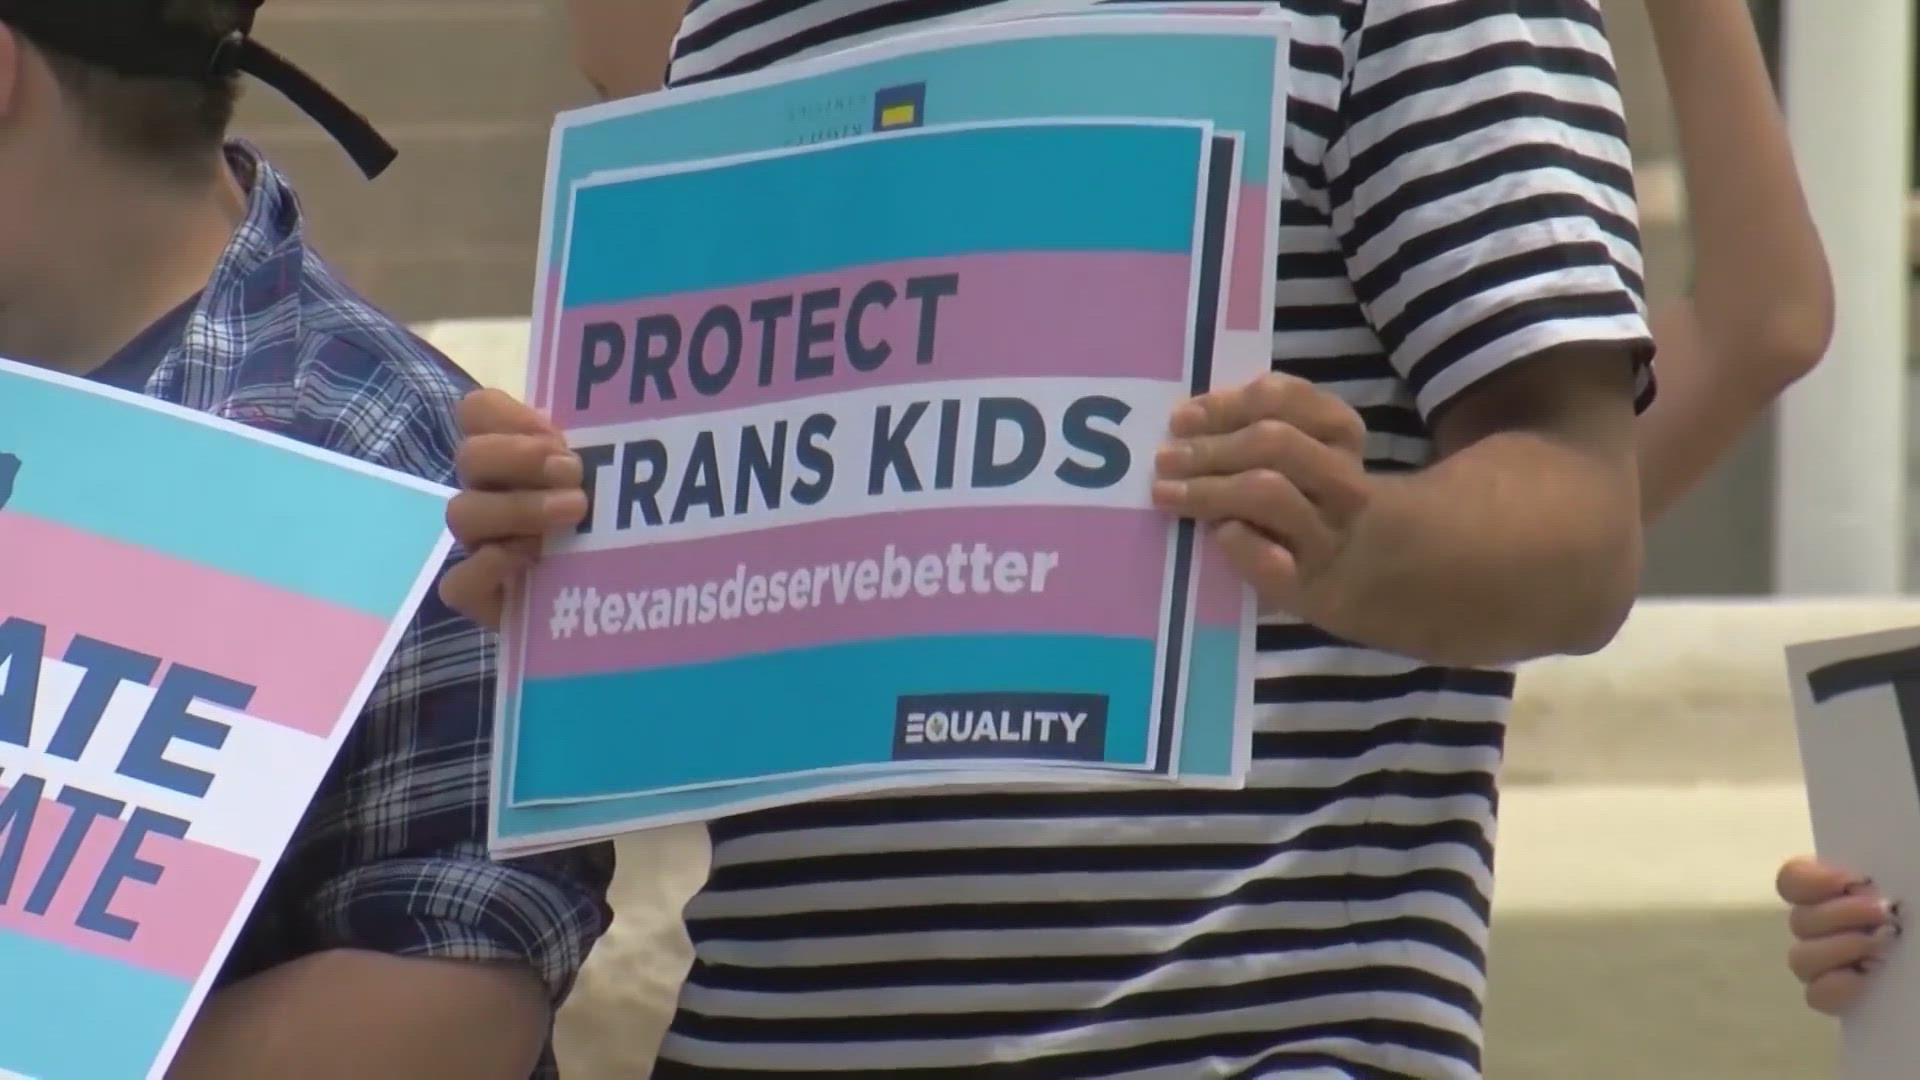 Senate Bill 14 bans the use of puberty blockers and hormone therapy, which advocates say can save the lives of trans youths.